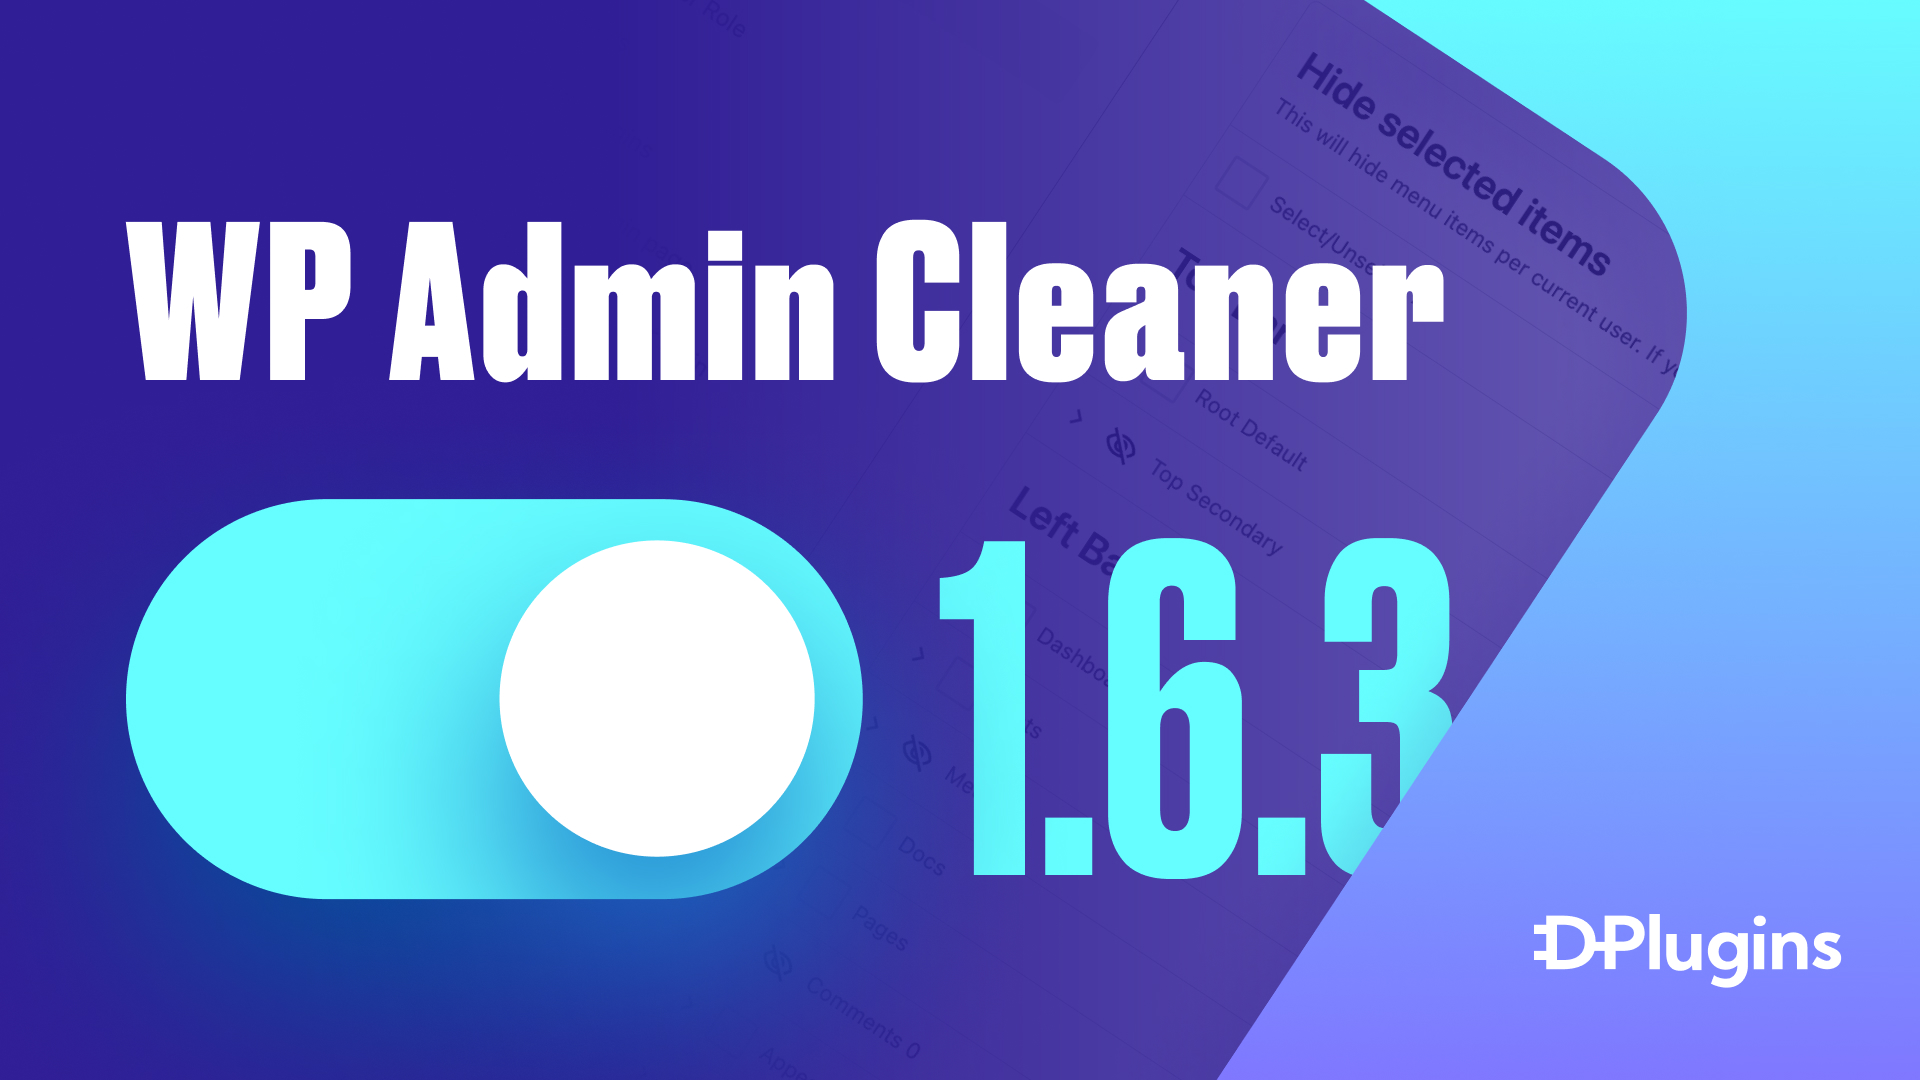 WP Admin Cleaner Gets Even More Awesome! 🔥